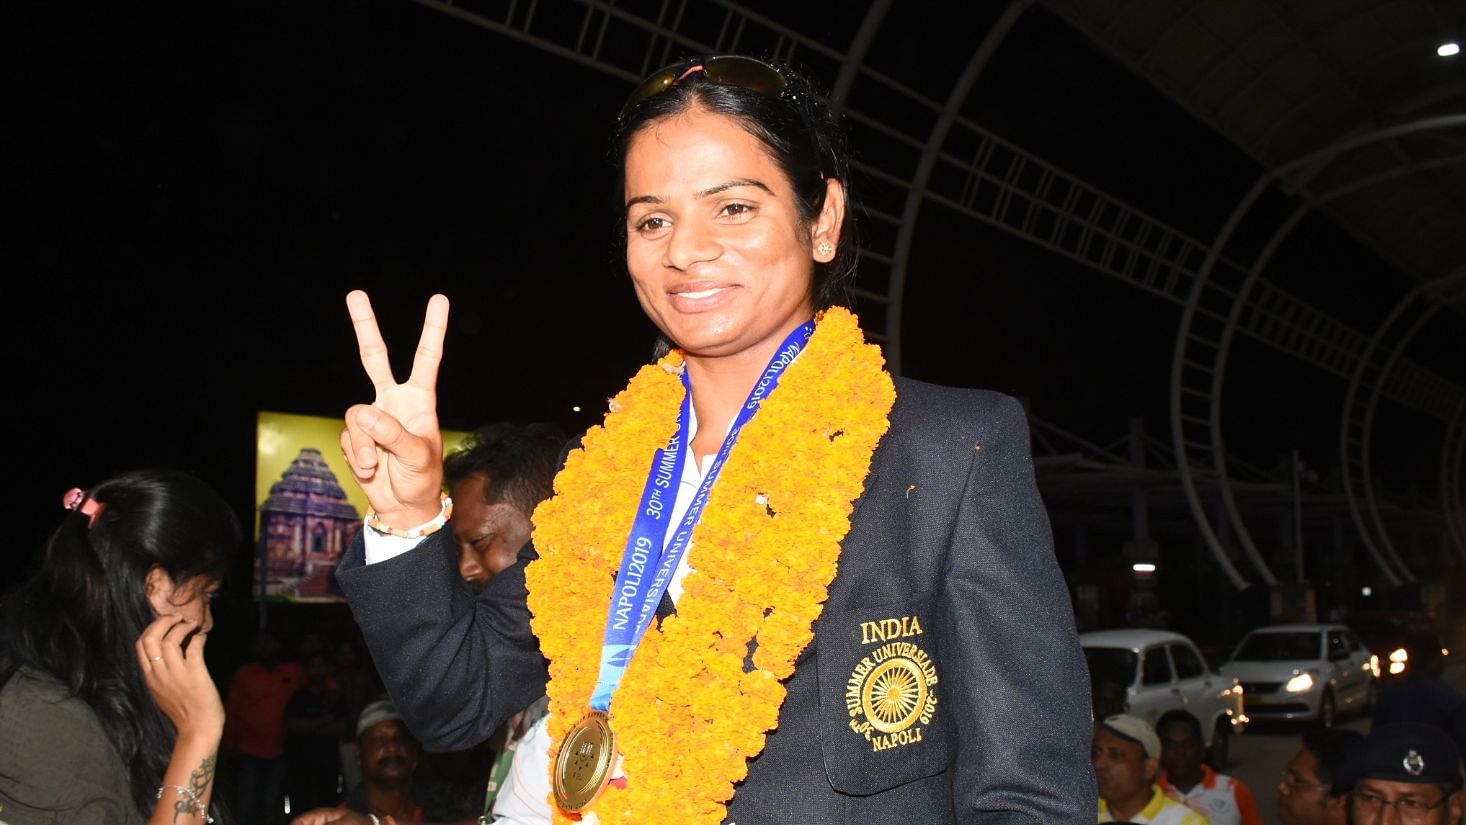 Indian athlete Dutee Chand requested the External Affairs Minister S Jaishankar to help her get visa.